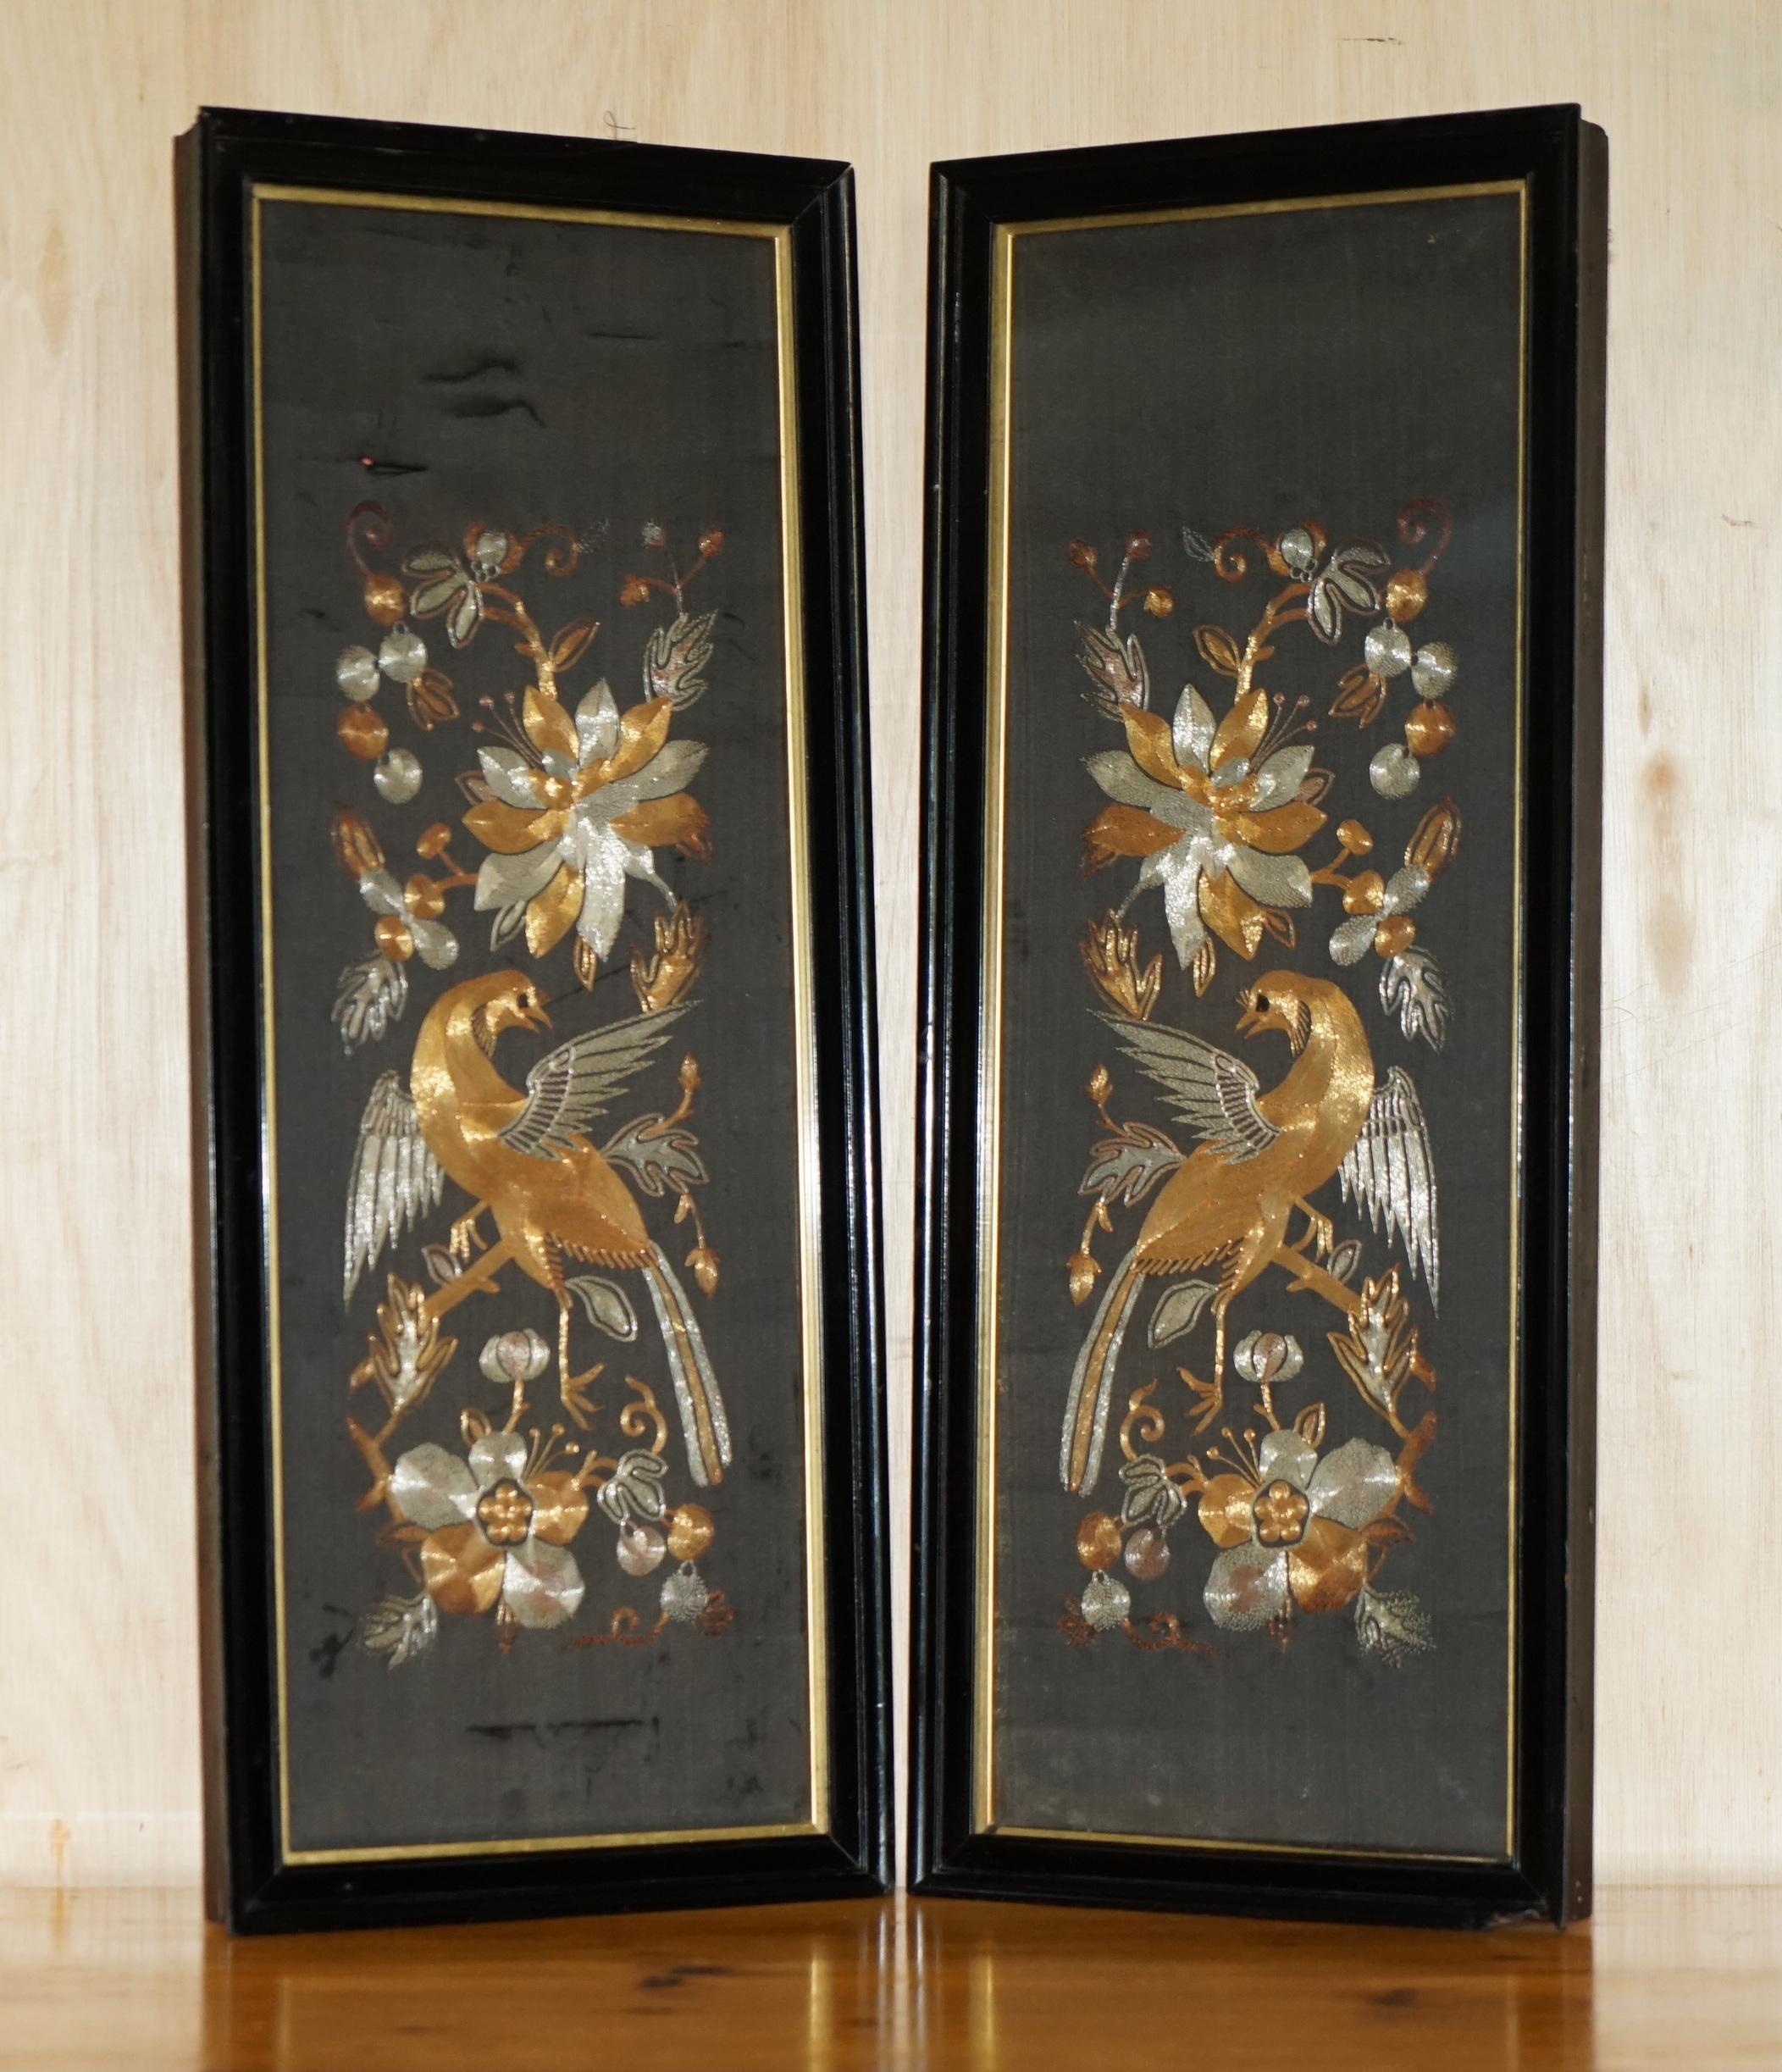 Royal House Antiques

Royal House Antiques is delighted to offer for sale this stunning pair of original circa 1880 Chinese gold and silver threaded tapestry on silk depicting Chinese Birds in floral settings 

Please note the delivery fee listed is